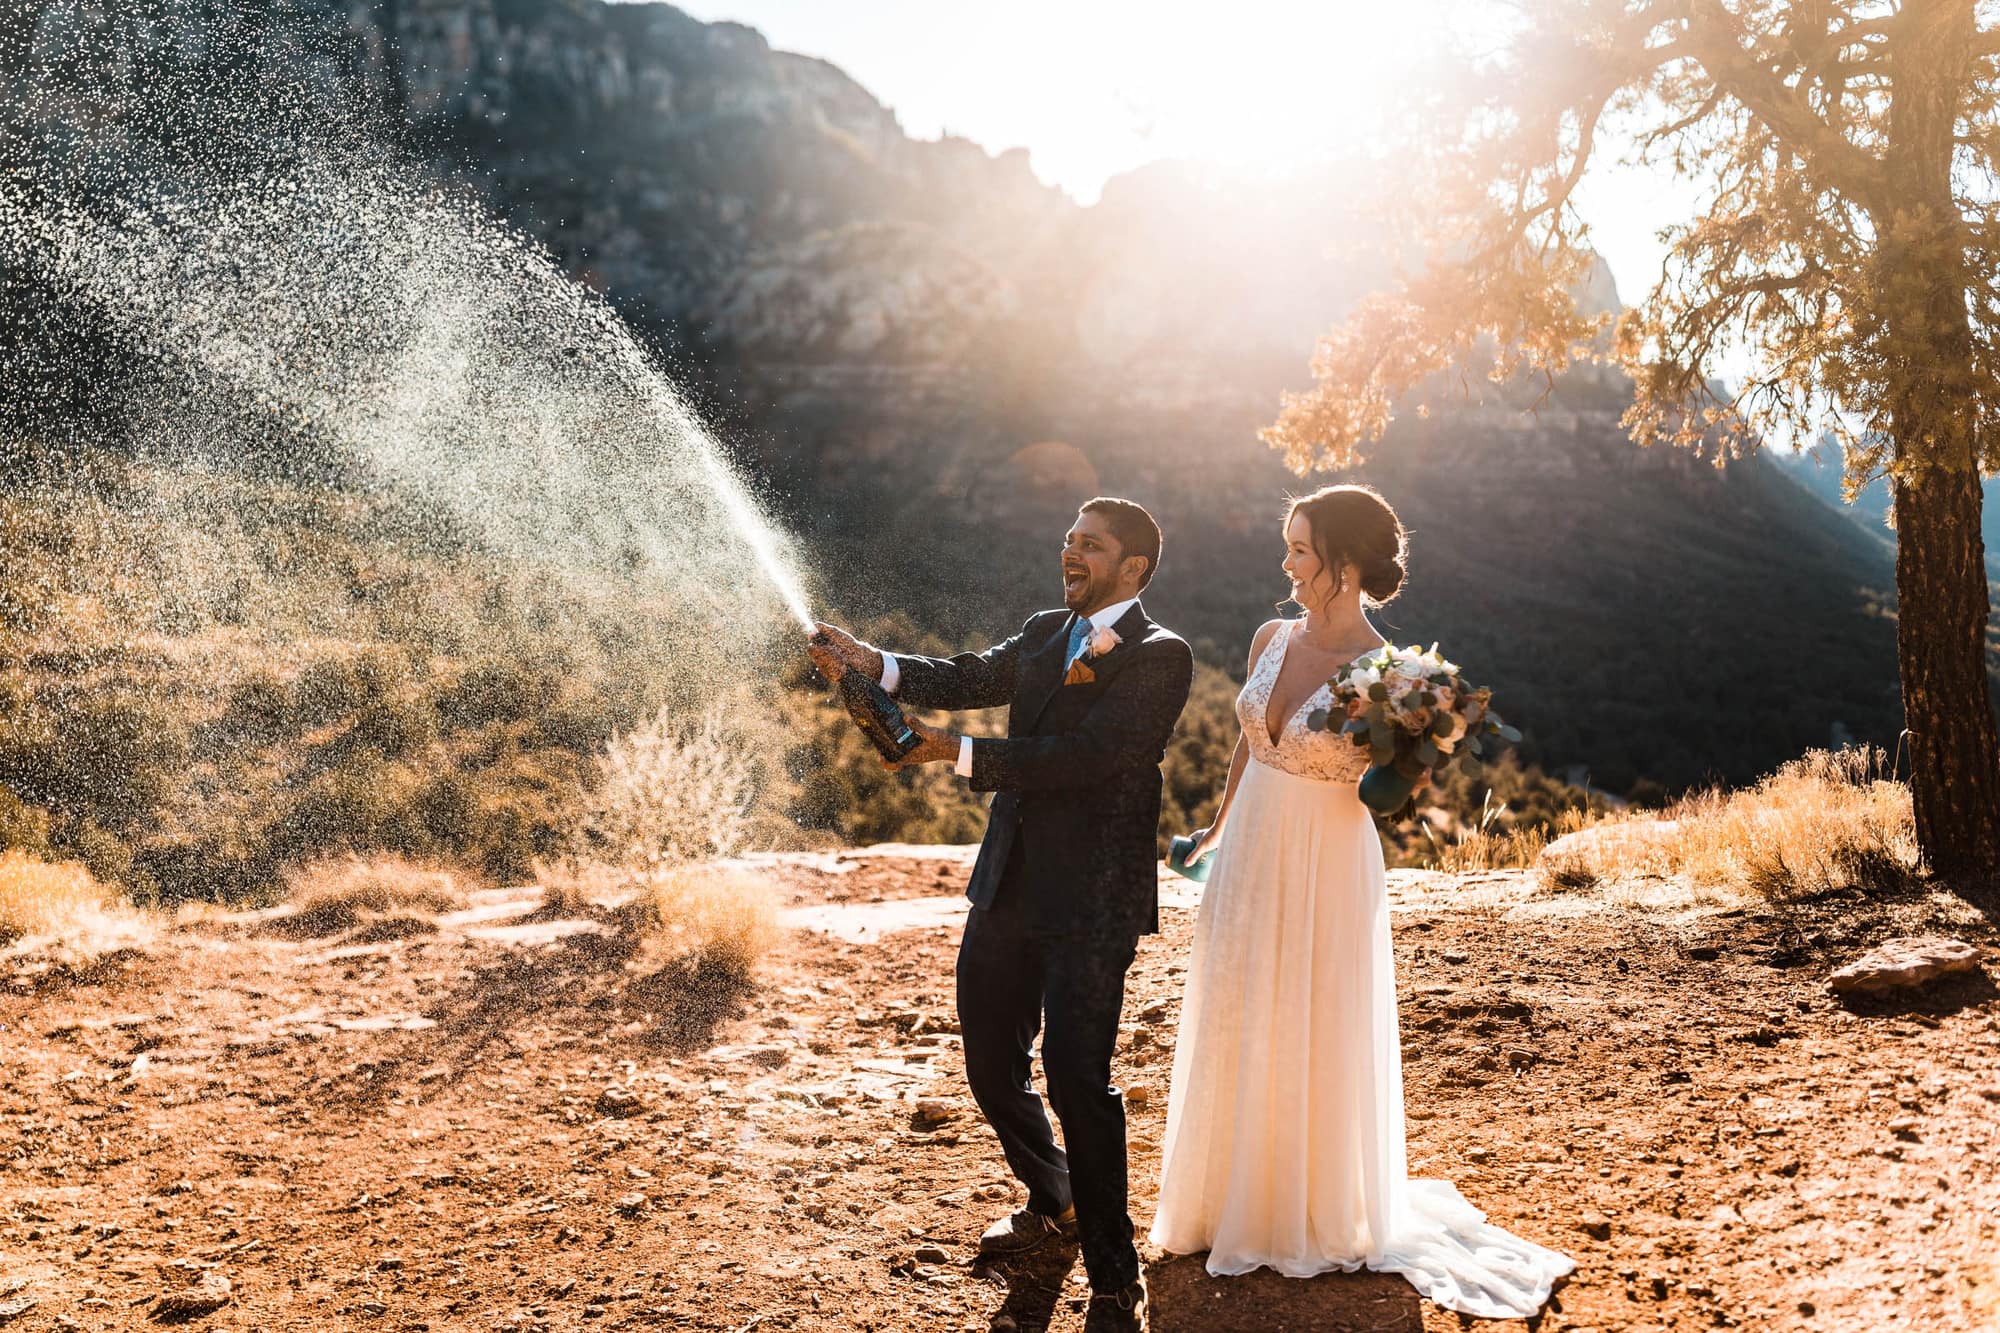 If you want to elope in Sedona, this Sedona elopement planning guide is for you. I share all the info you need to plan an epic day.